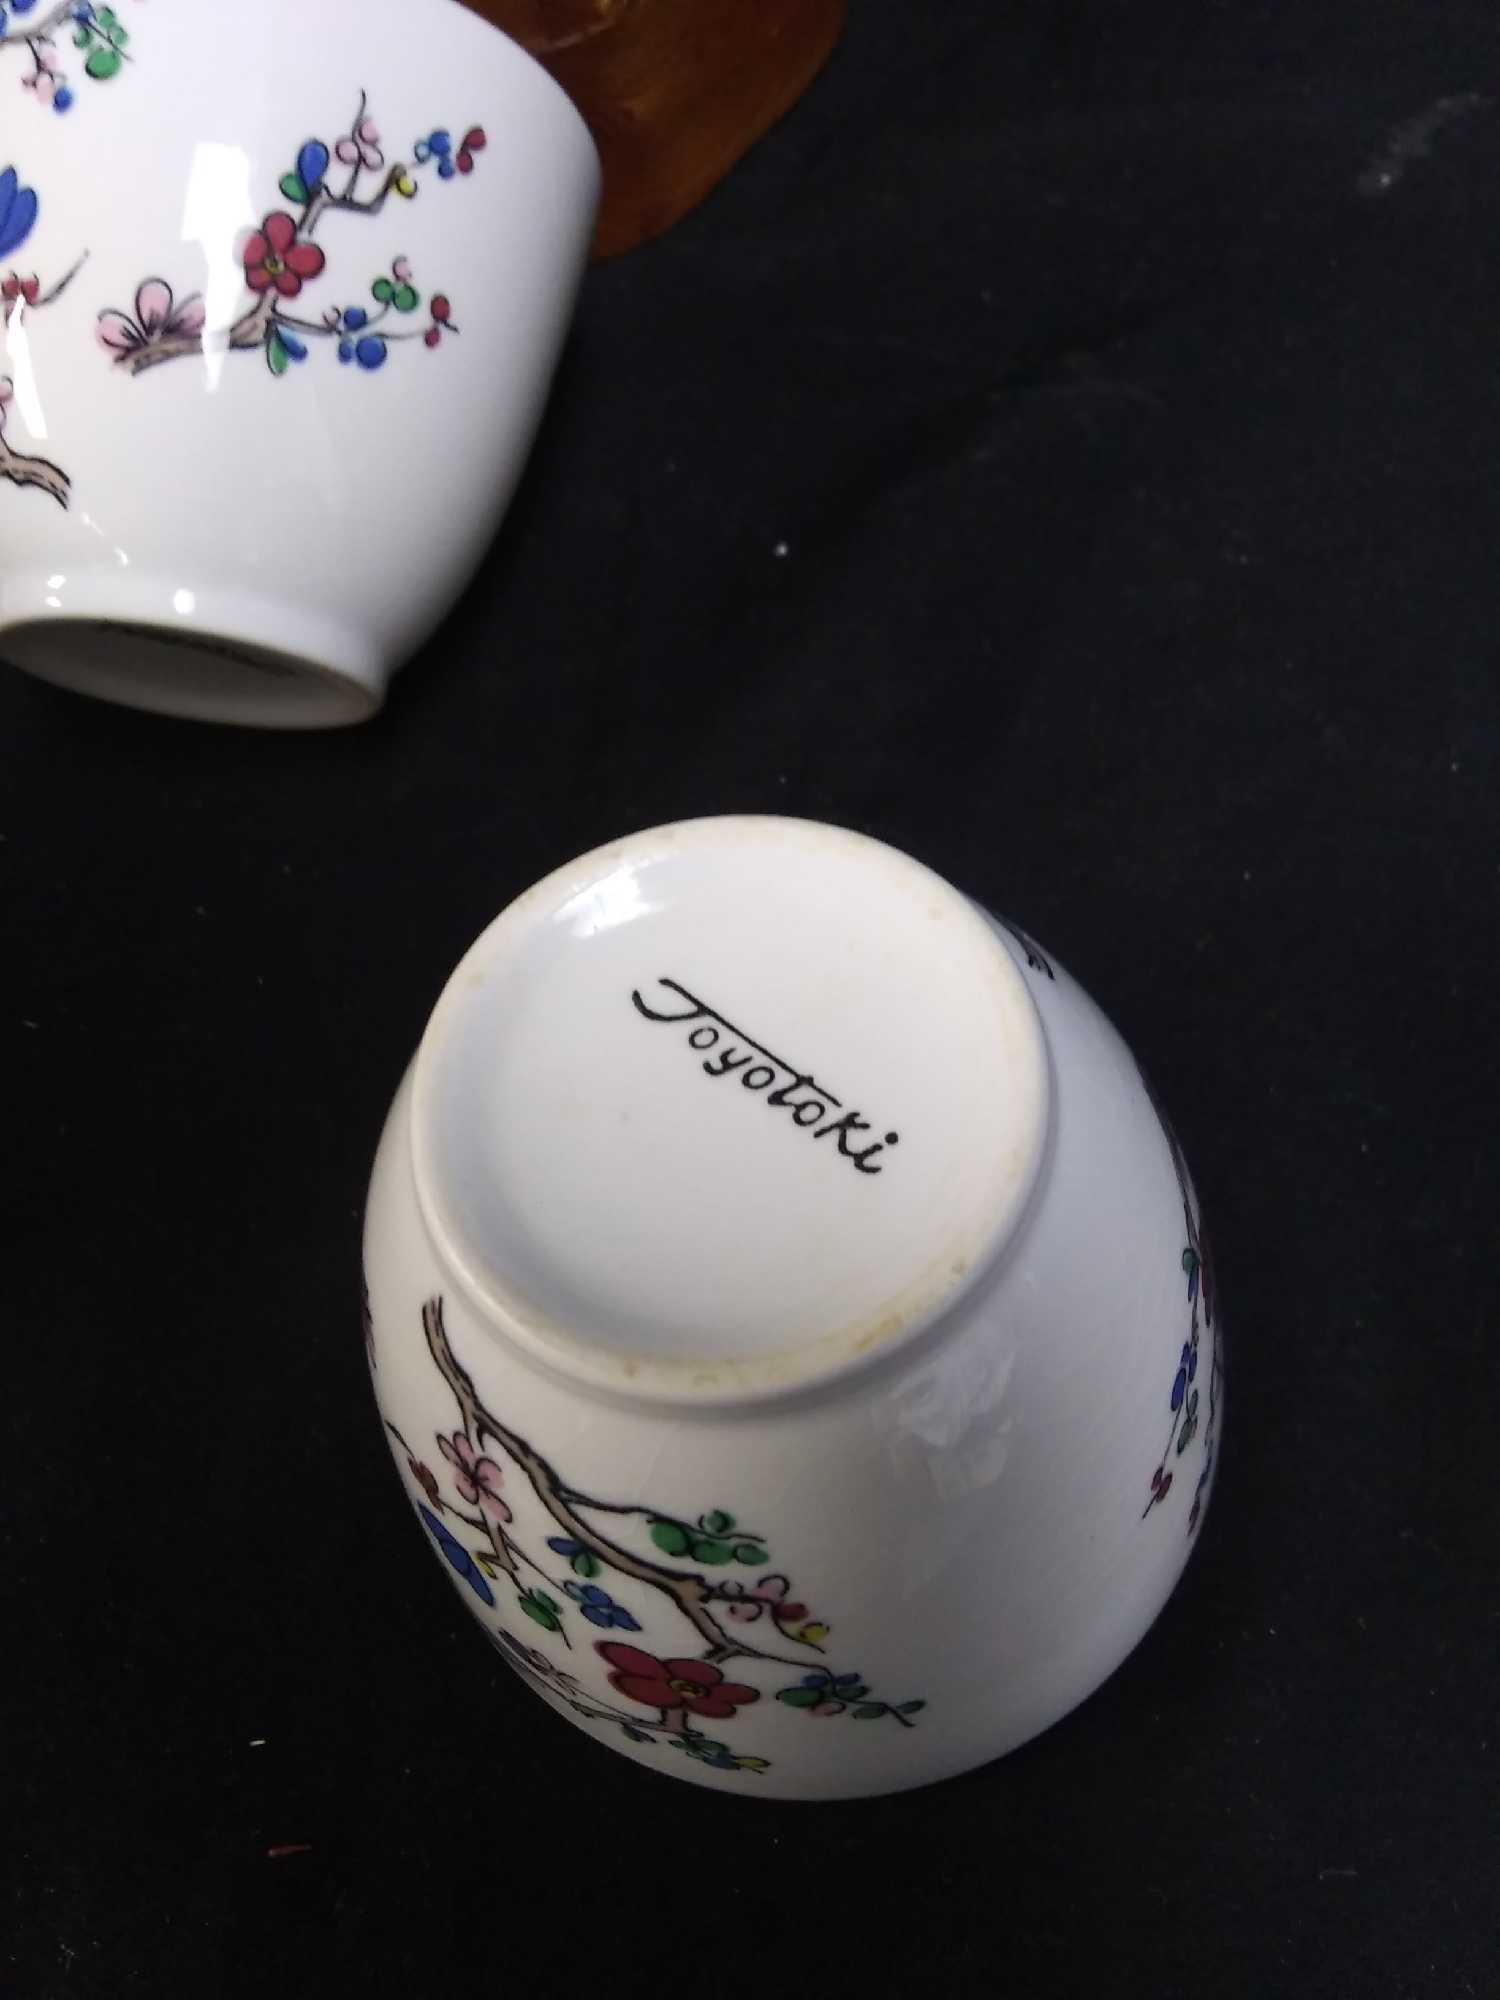 East Asian Ceramics and Incense Items Including Toyotoki Cups